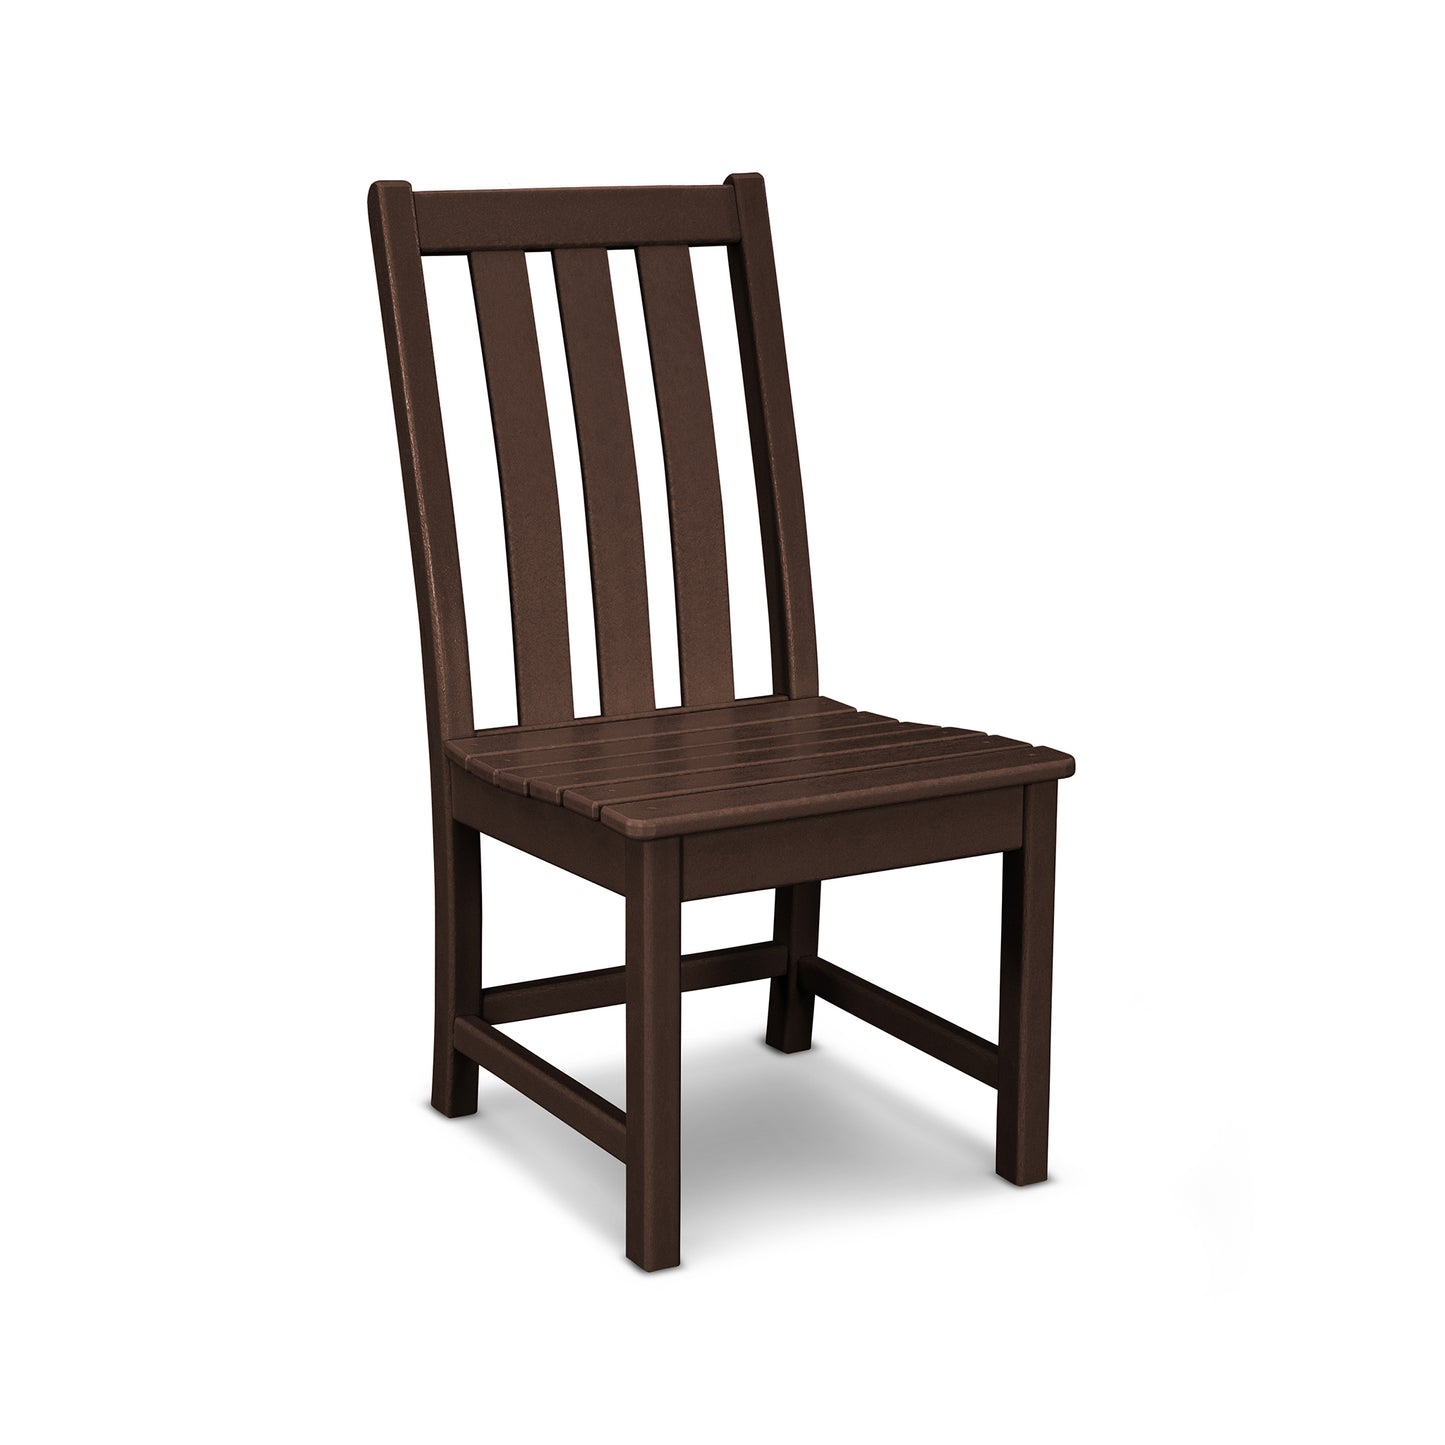 A brown wooden dining chair on a white background.